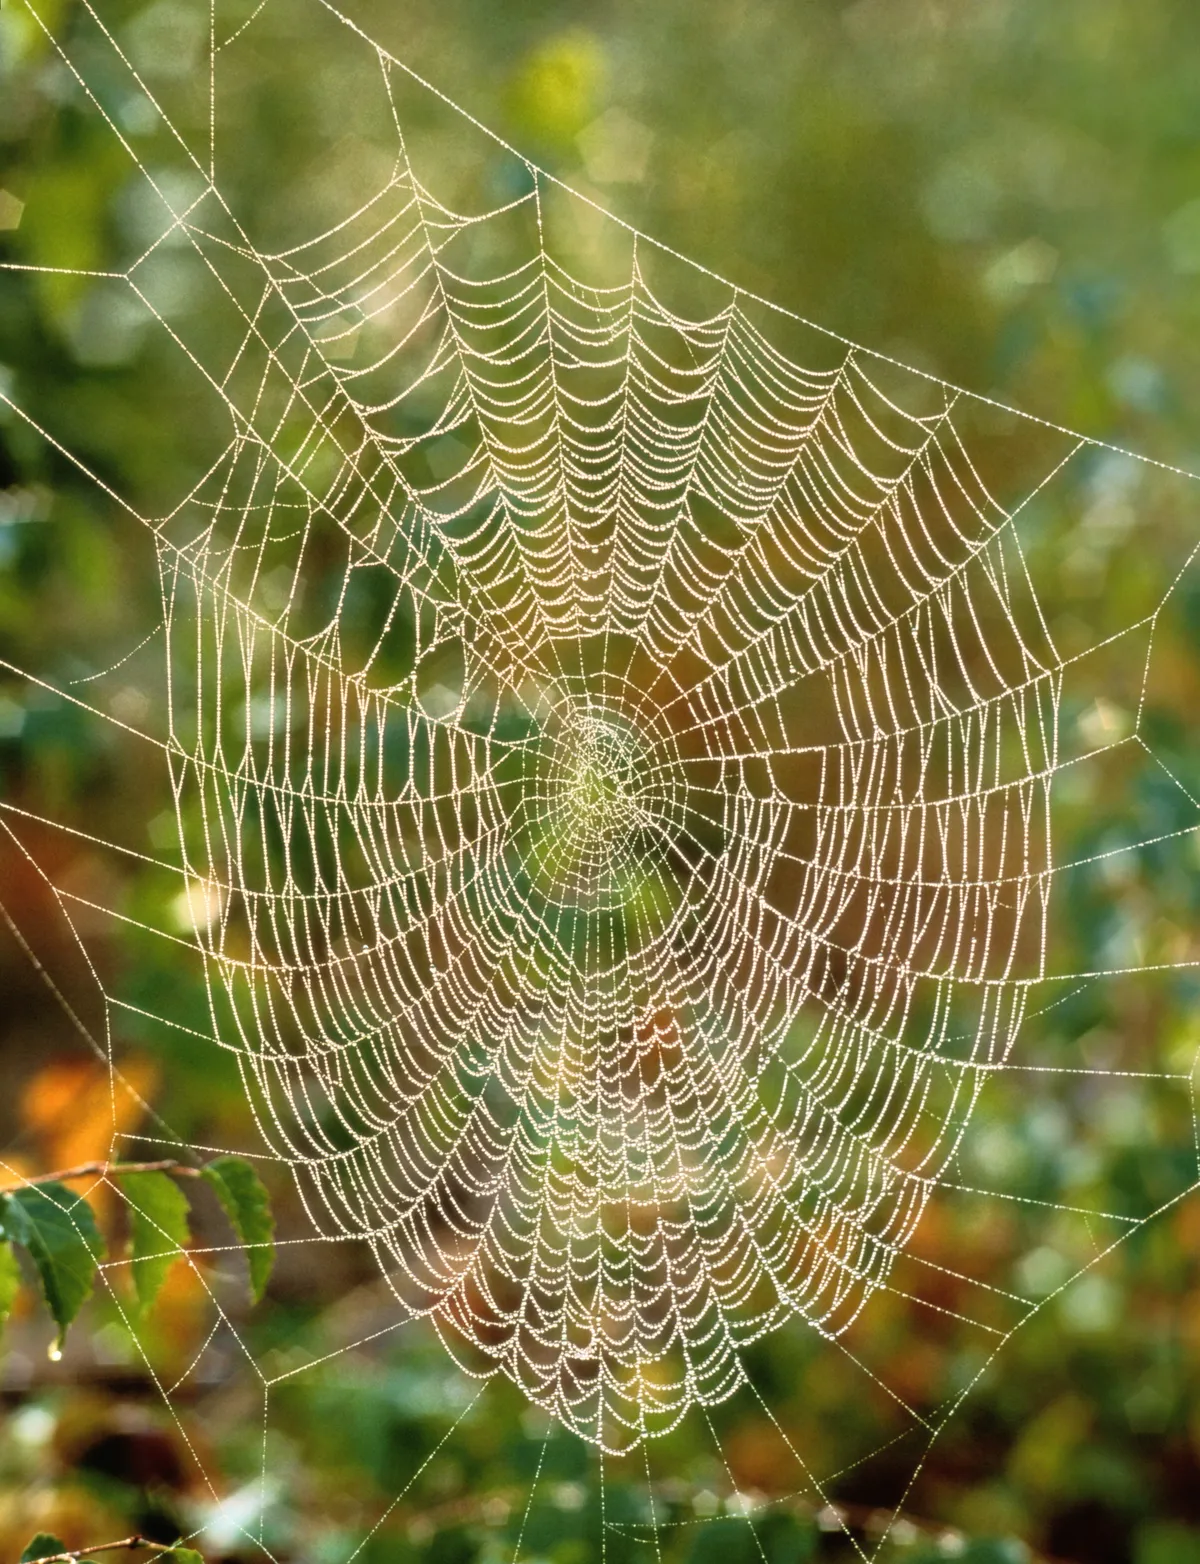 Several spiders spin webs using spider silk, a protein polymer which is very strong and elastic. Web building can be extremely complex, with the inclusion of several types of strand including sticky, and scaffolding threads./© Getty